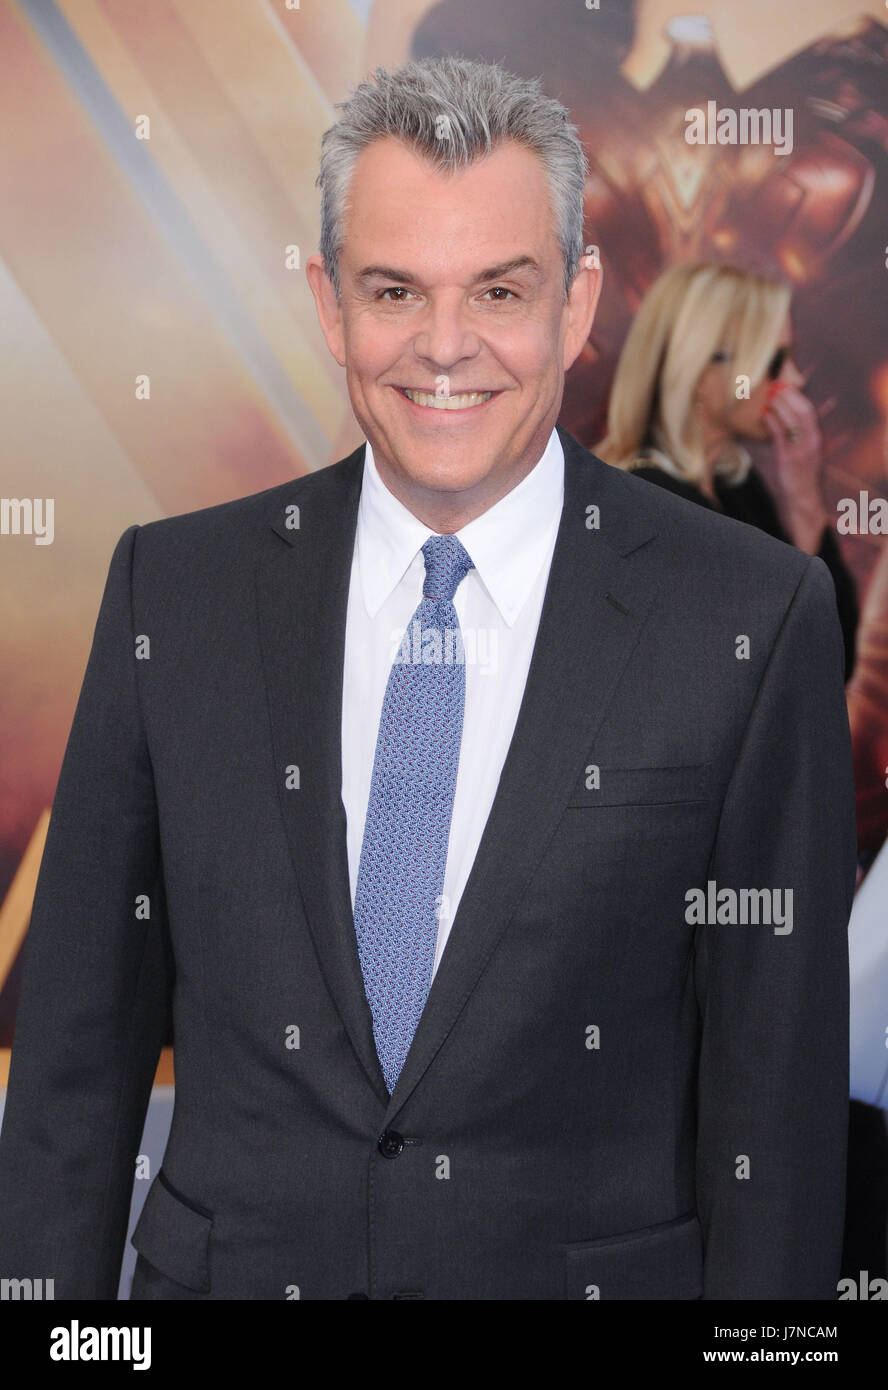 Hollywood, California, USA. 25th May, 2017. Danny Huston. World  Premiere of Warner Bros. Pictures'  'Wonder Woman' held at The Pantages Theater in Hollywood. Photo Credit: Birdie Thompson/AdMedia Photo via Newscom/Alamy Live News Stock Photo